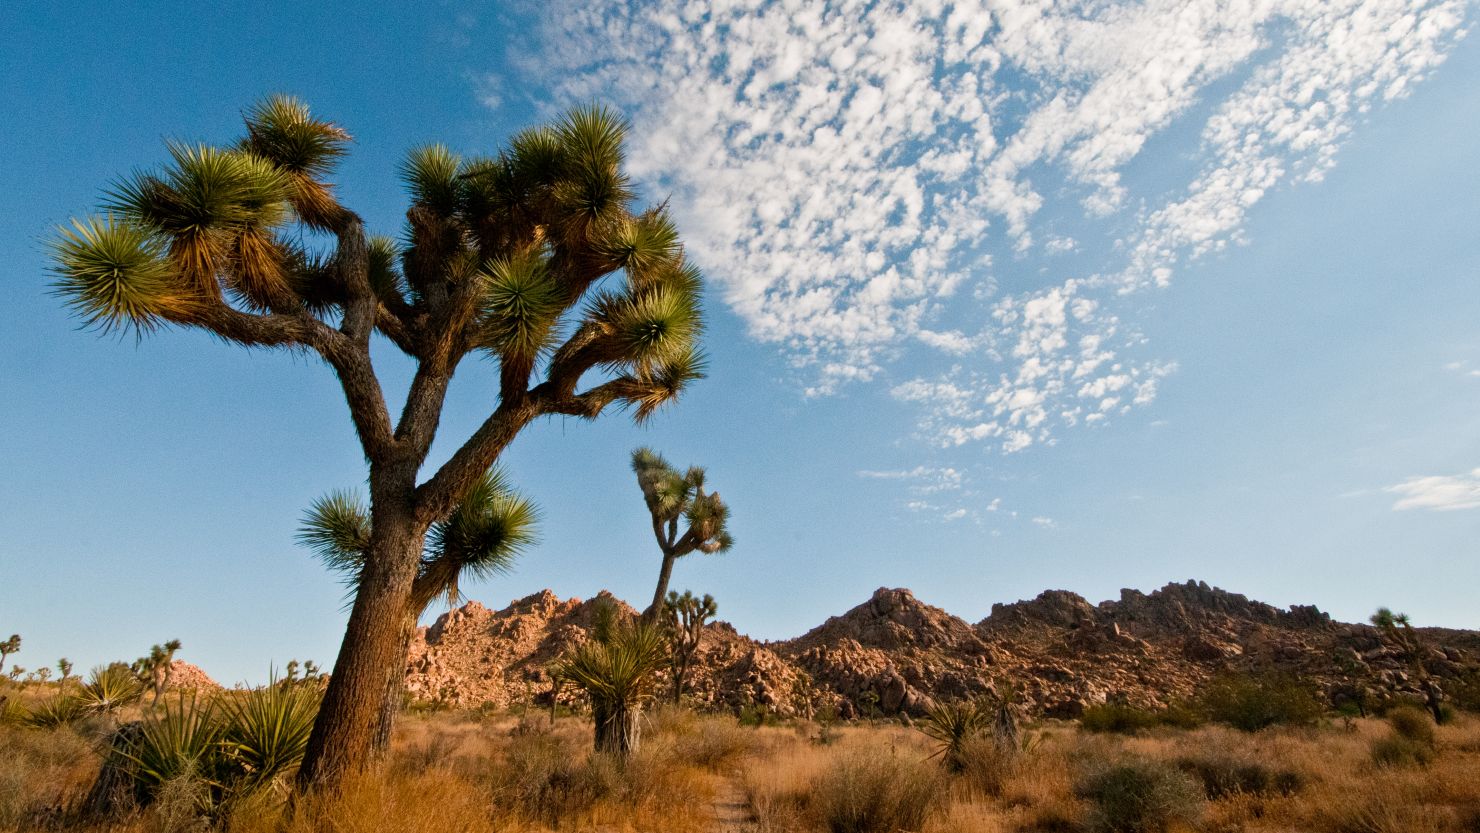 Joshua Tree was designated a national park in 1994.